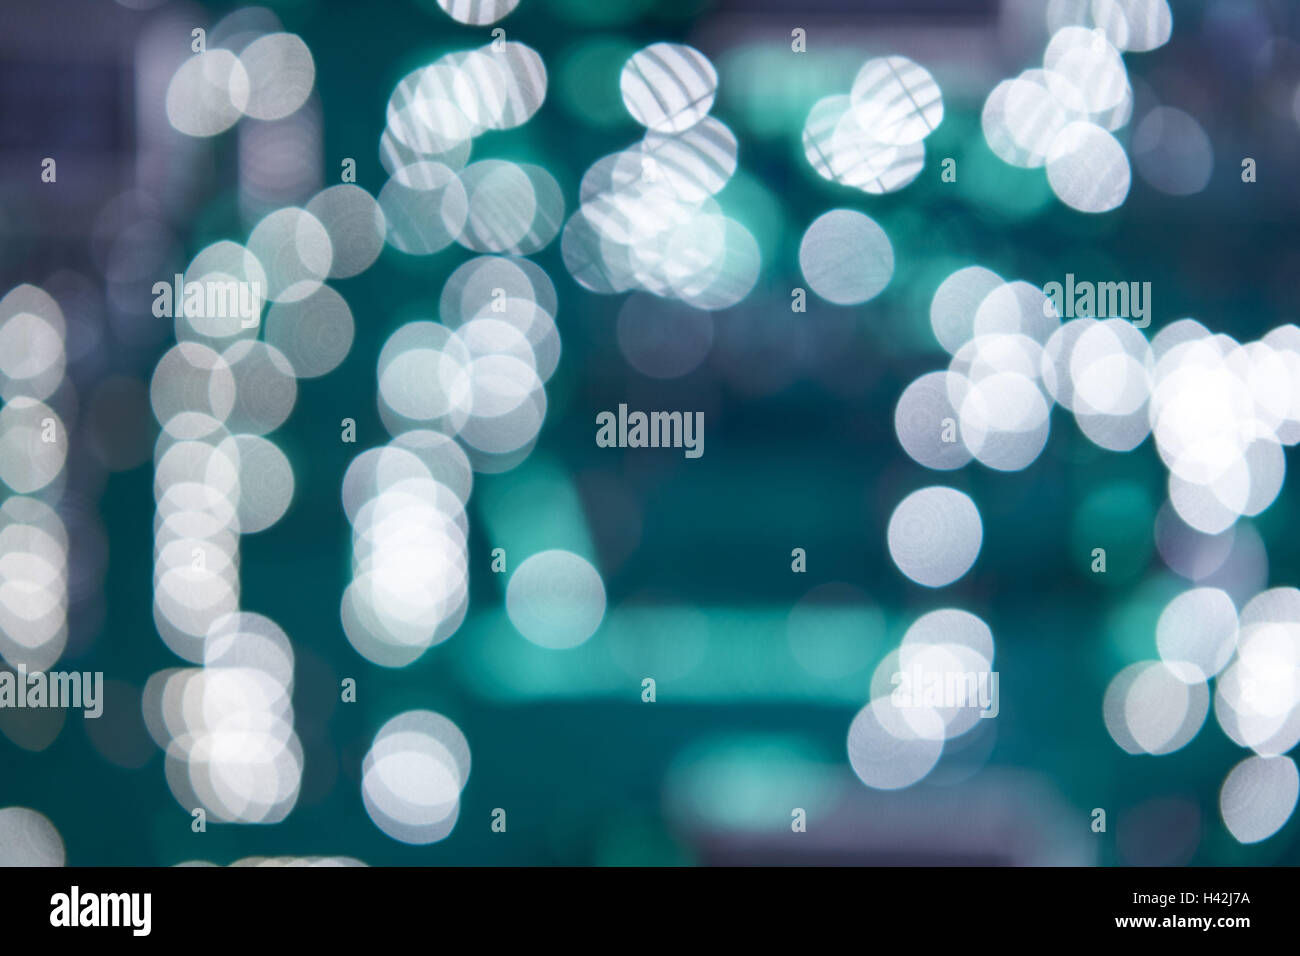 To computer board, light reflexions, extreme close-up, blur, to computer board, board, lights, around, points light, dots, electronics, glitter, green, white, technology, Stock Photo